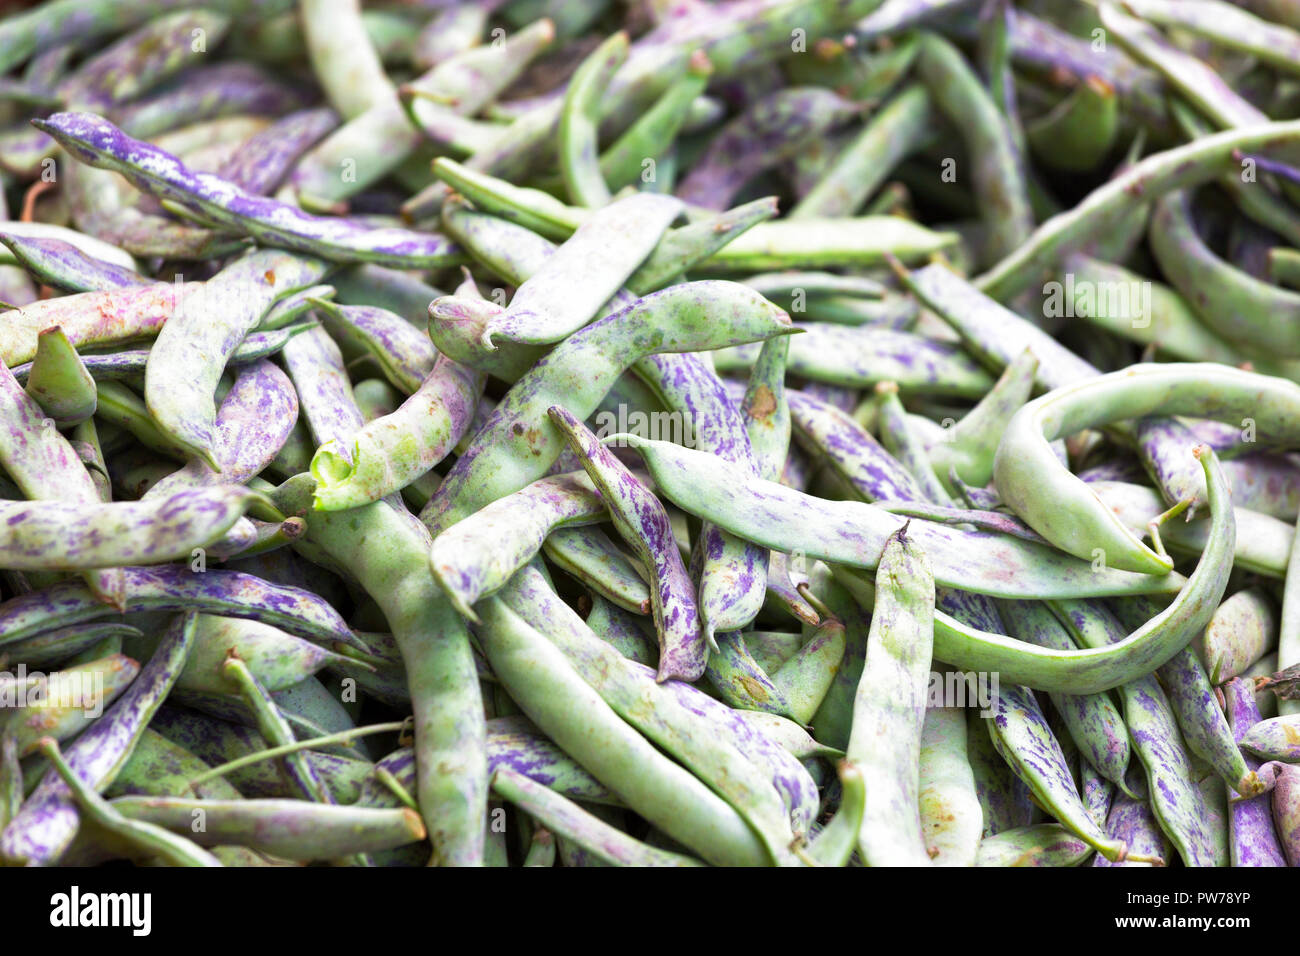 Fresh green beans in pods close-up as background for design. Stock Photo